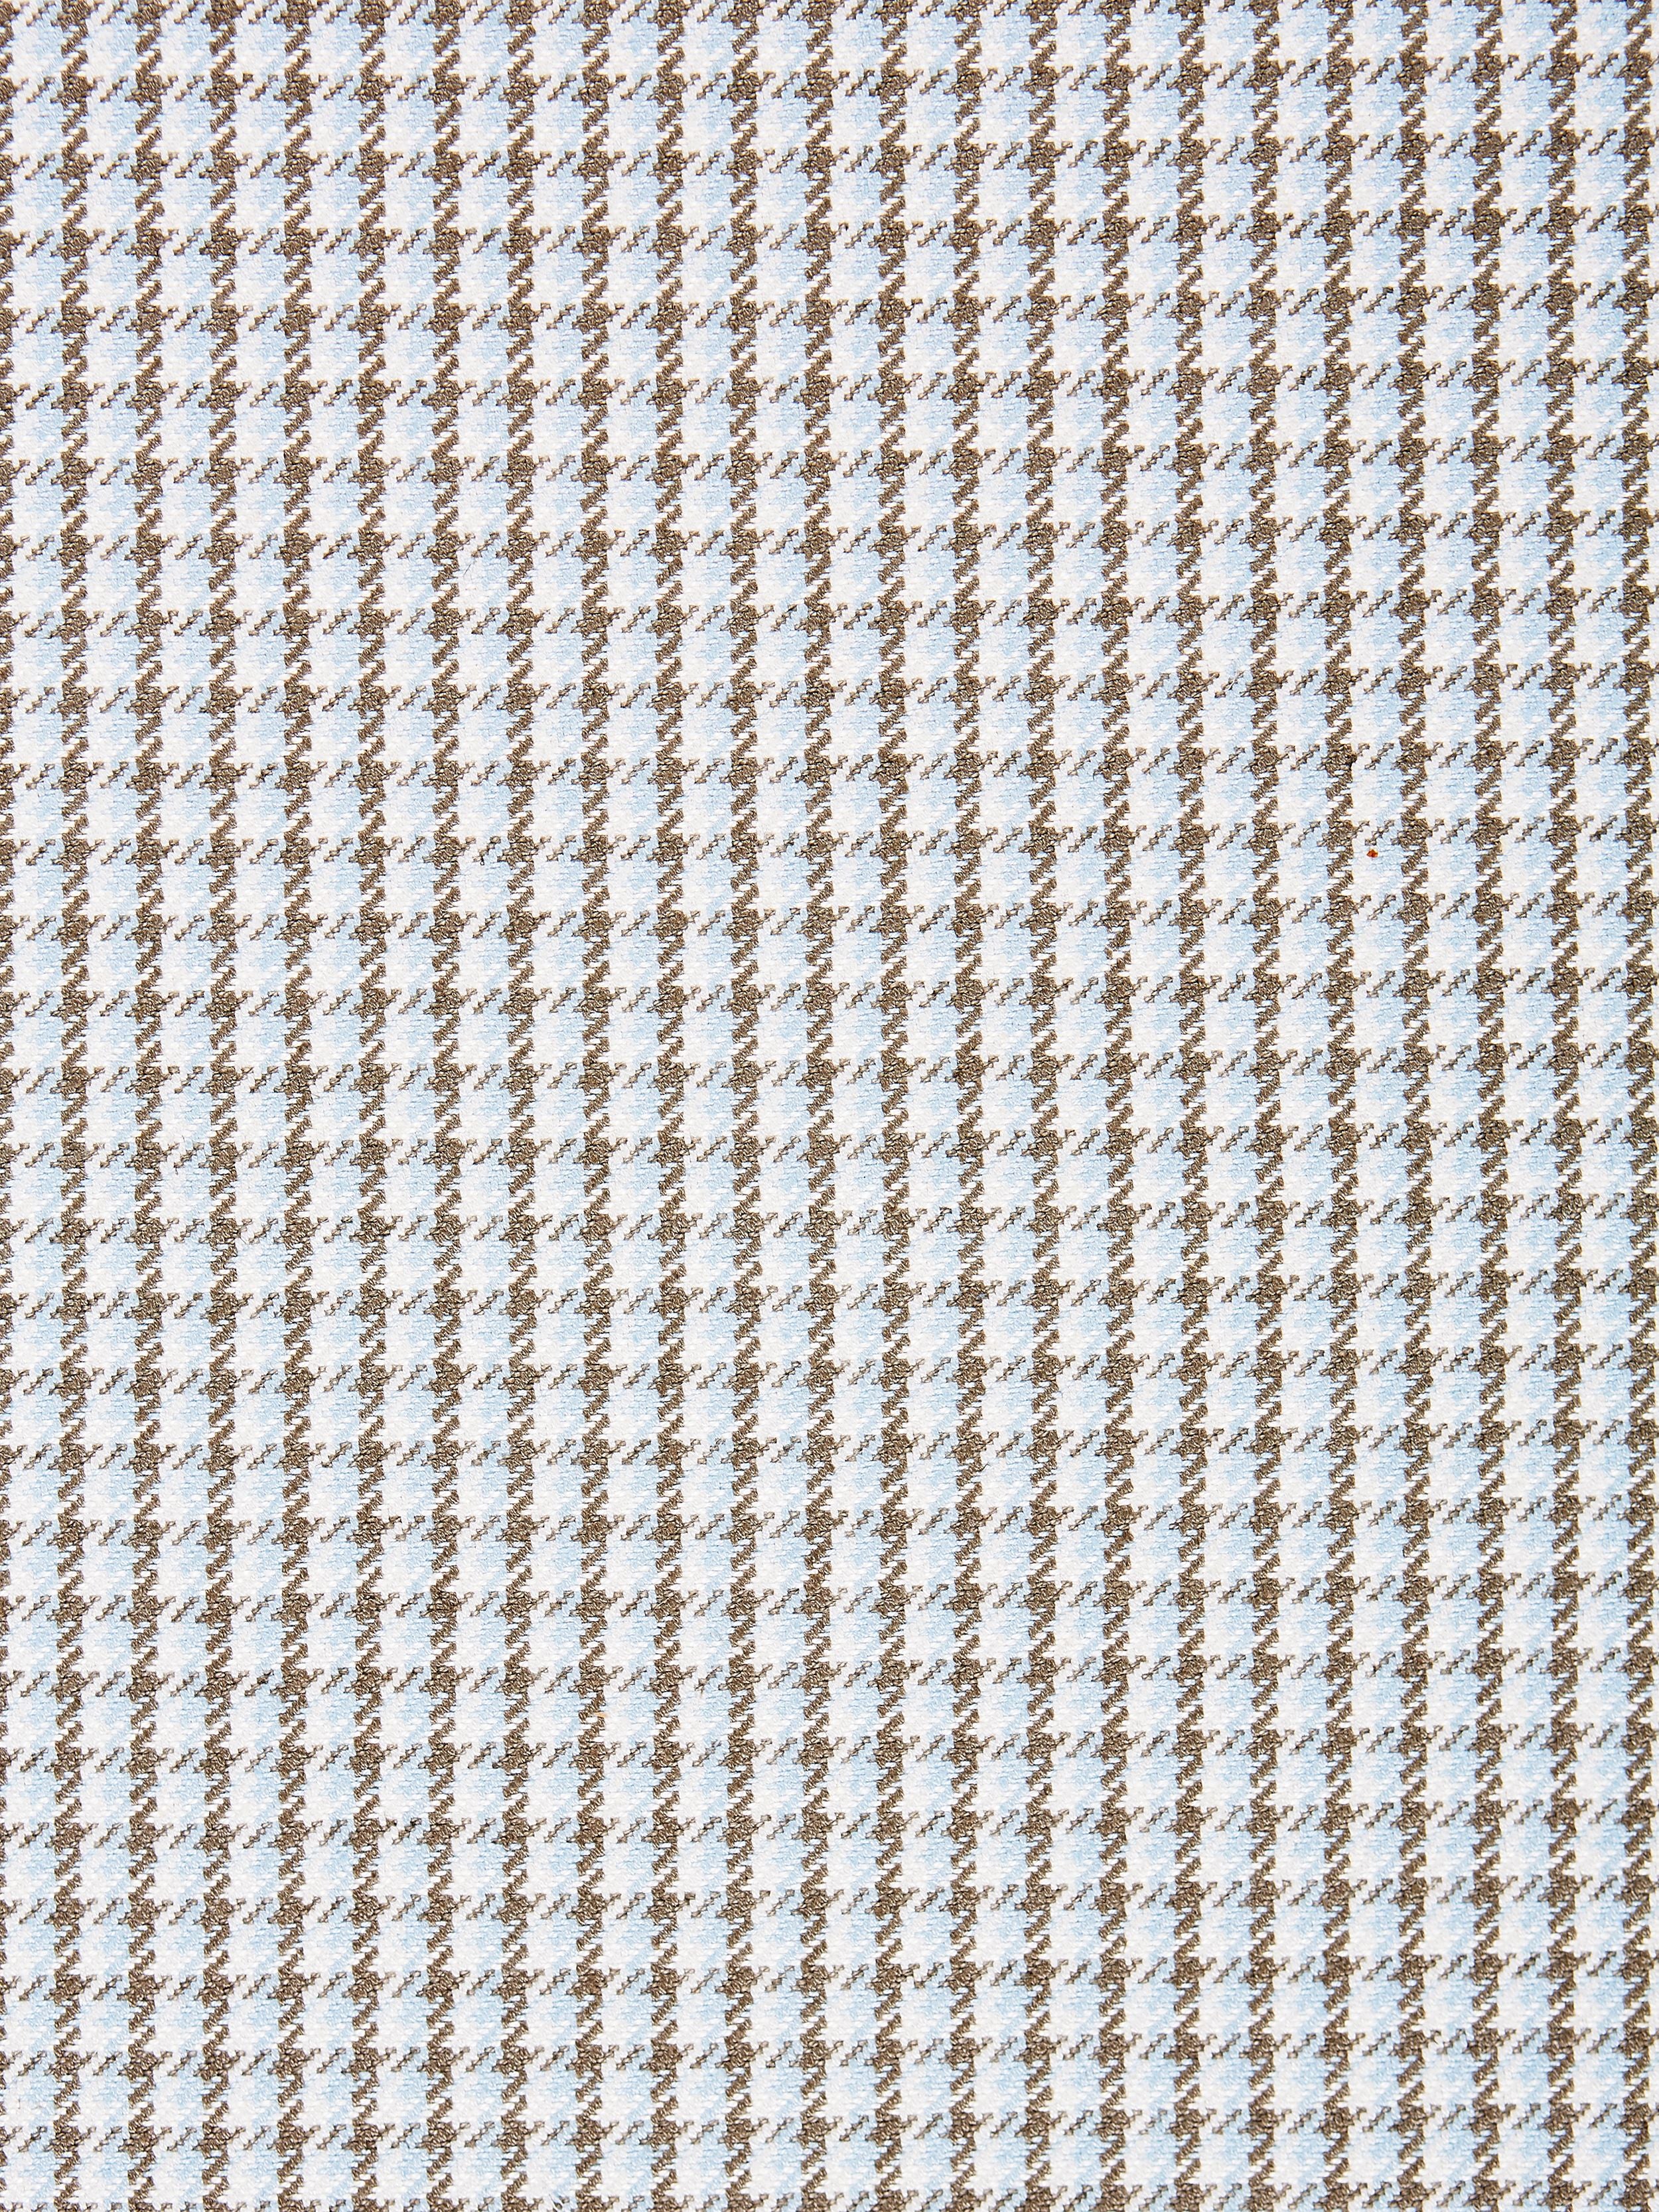 Tattersall Check fabric in sky color - pattern number SC 000127013 - by Scalamandre in the Scalamandre Fabrics Book 1 collection